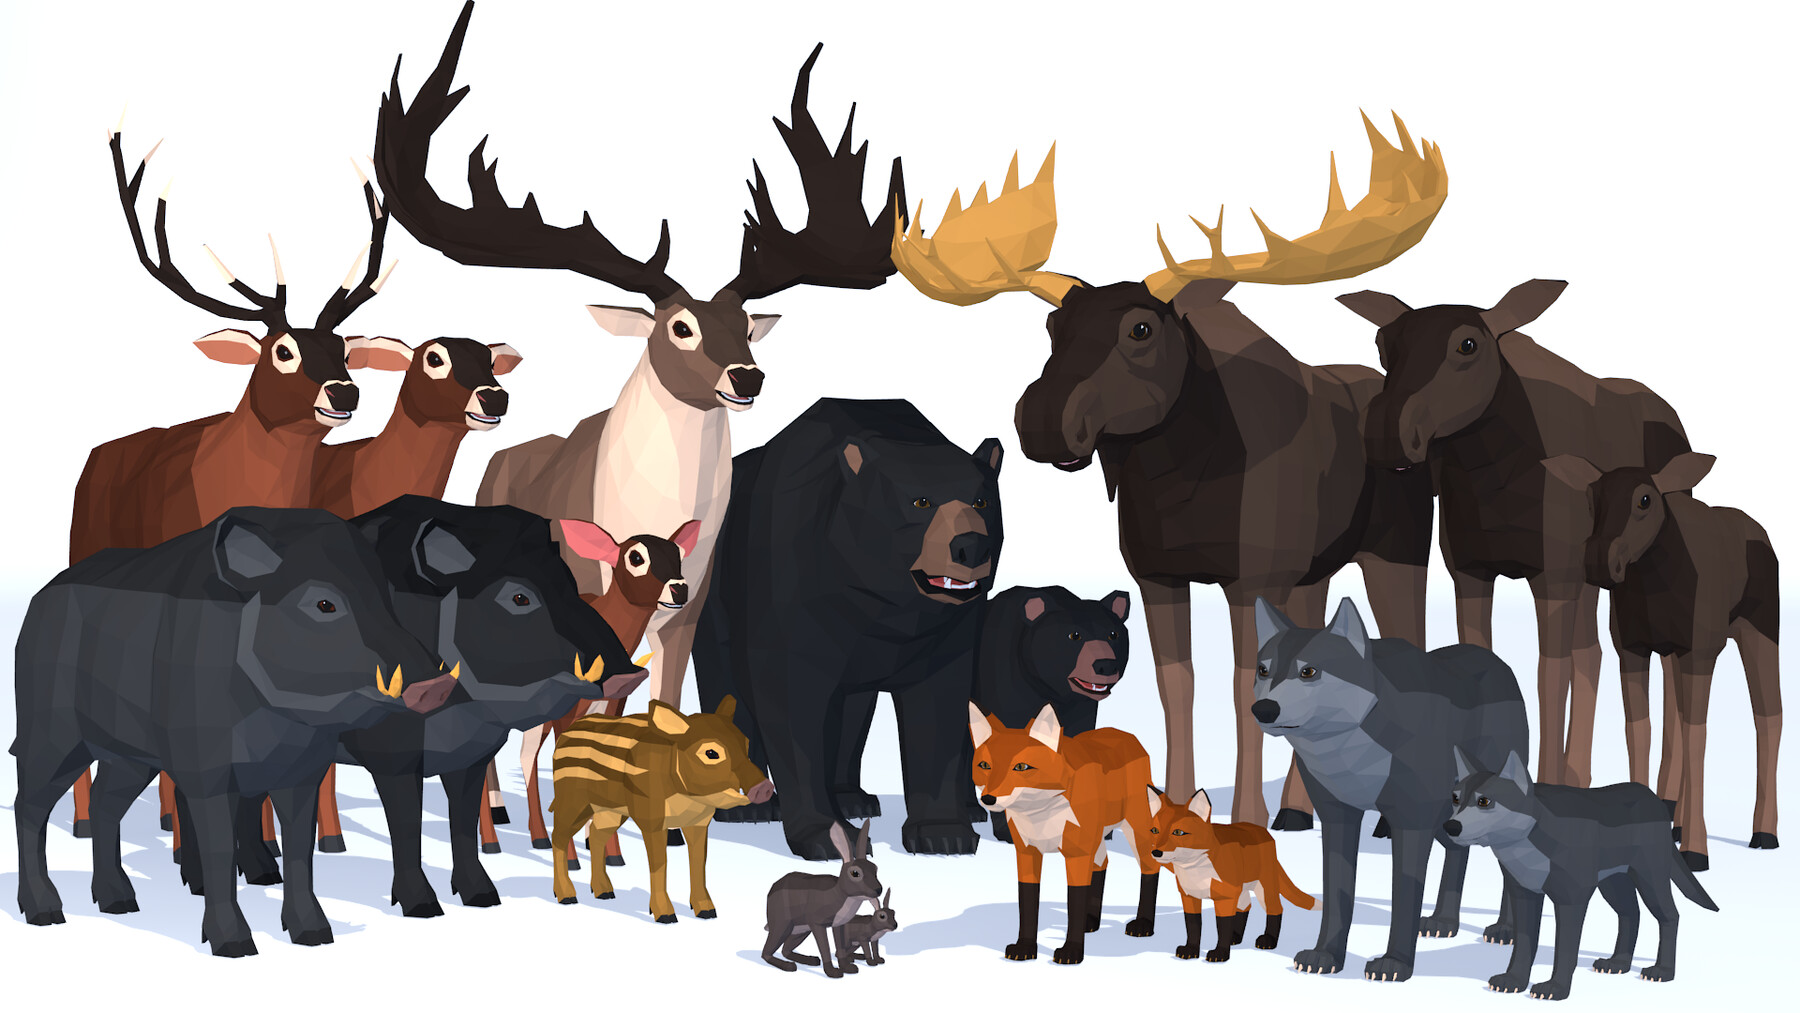 ArtStation - LowPoly Forest Animals pack | Game Assets